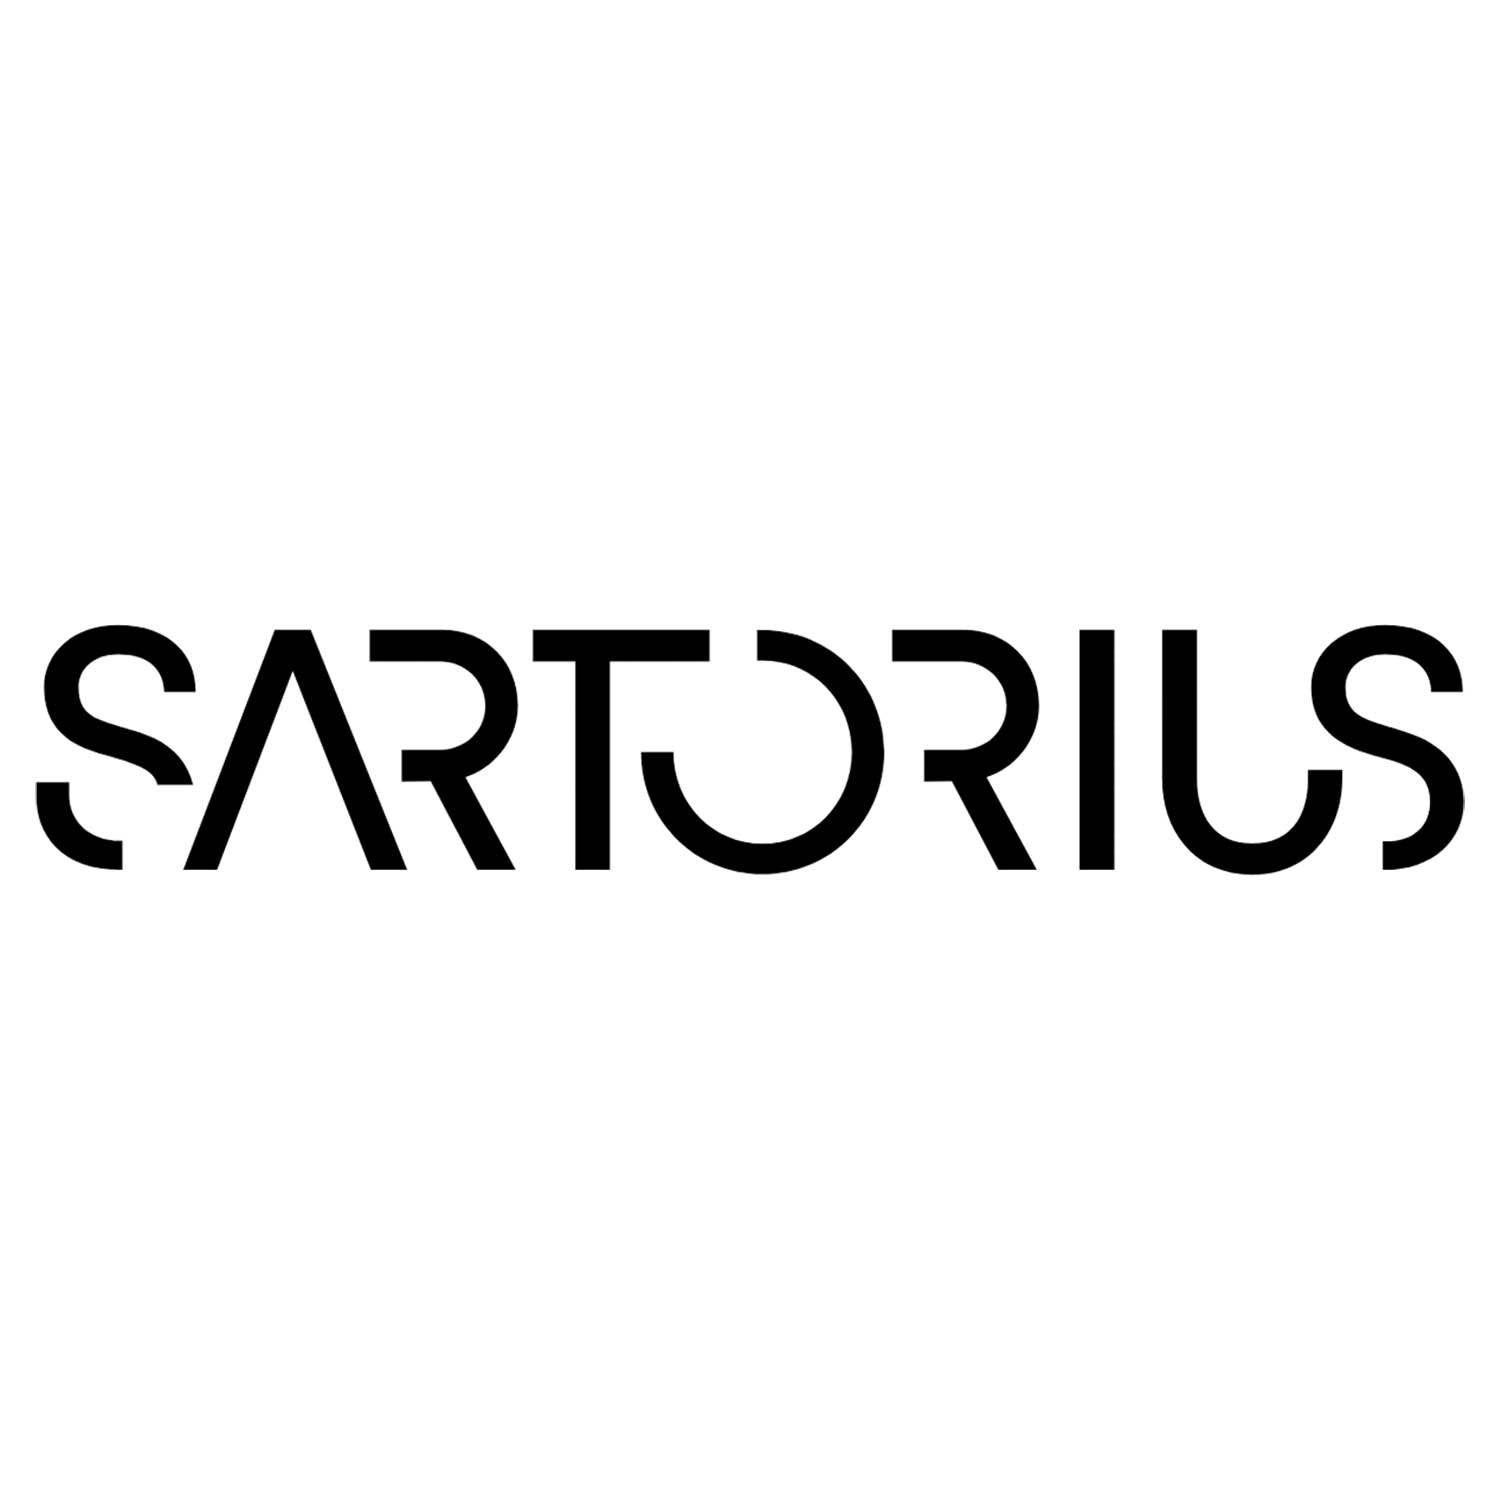 Sartorius FT-4-328-240, Technical Papers, Smooth/ Grade 100/N